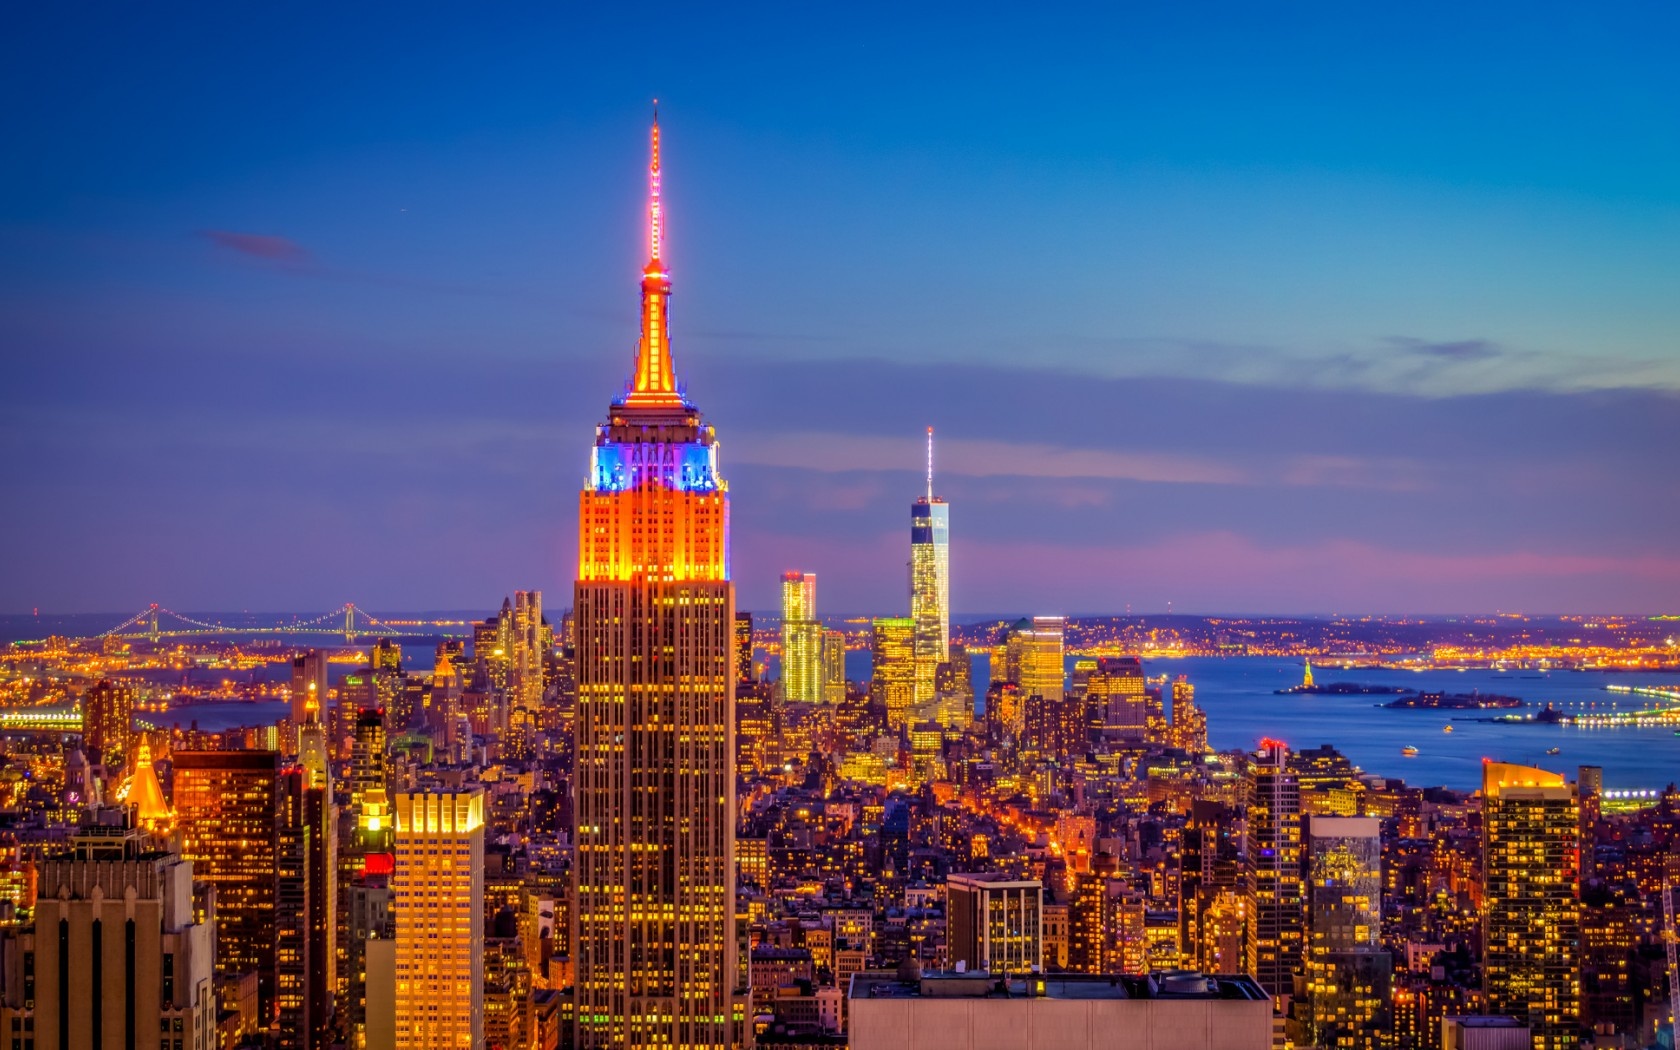 Empire State Building Wallpaper Pc Kq1xpxg 4usky